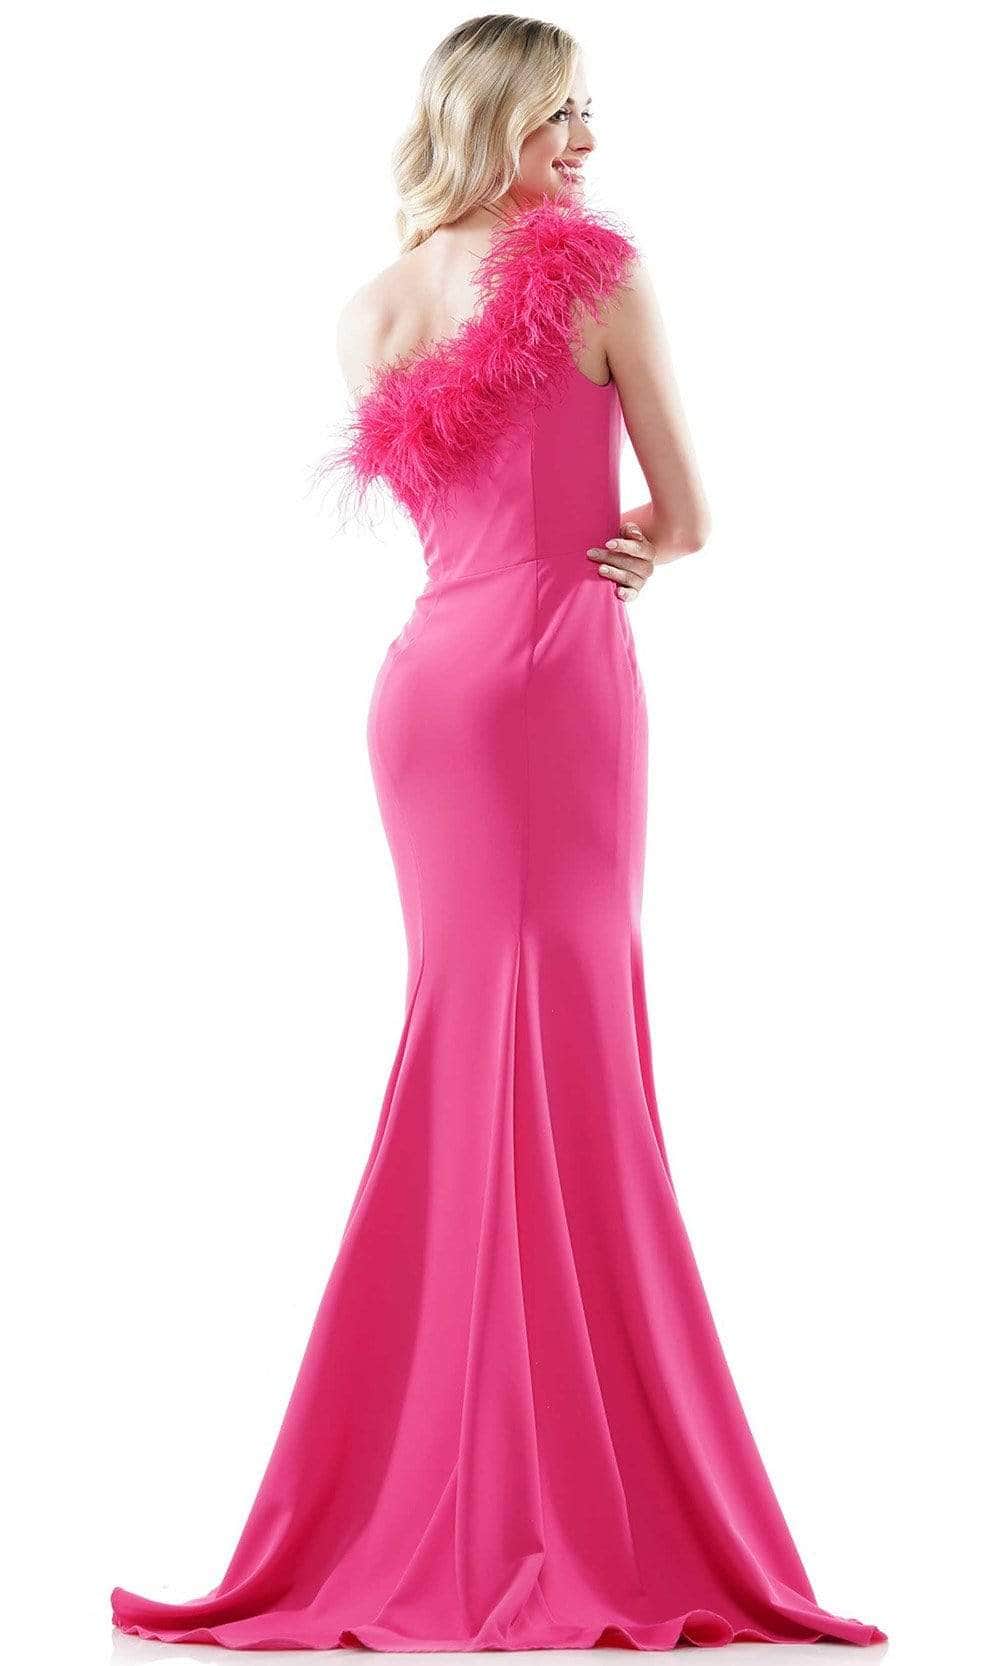 Colors Dress - Feathered Ornate One Shoulder Evening Dress 2405 CCSALE